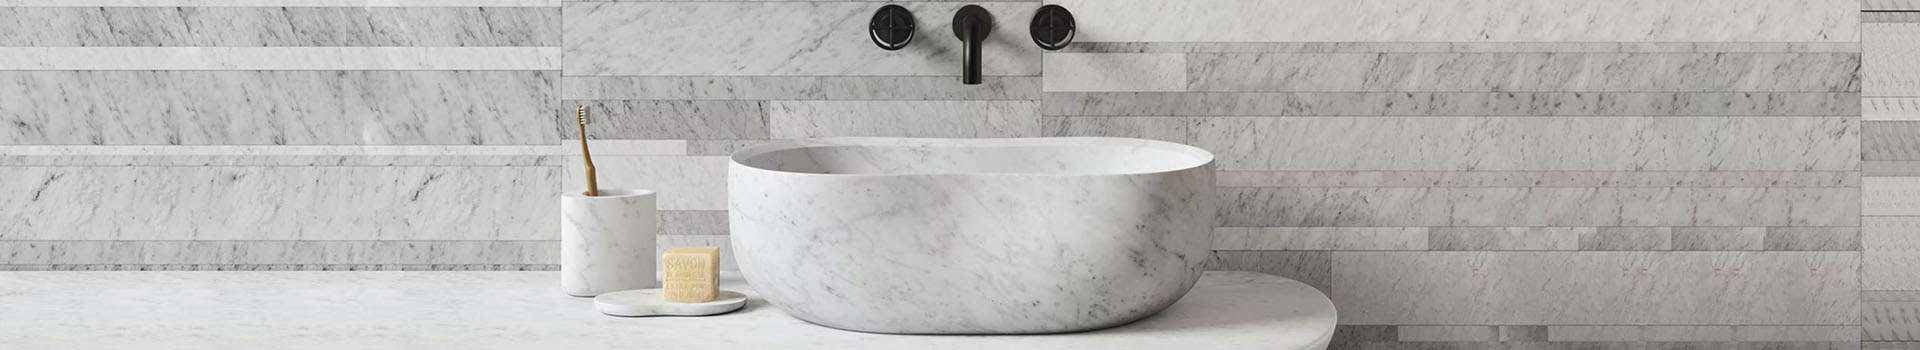 The Best Way to Clean and Use a Marble Vessel Sinks Basin